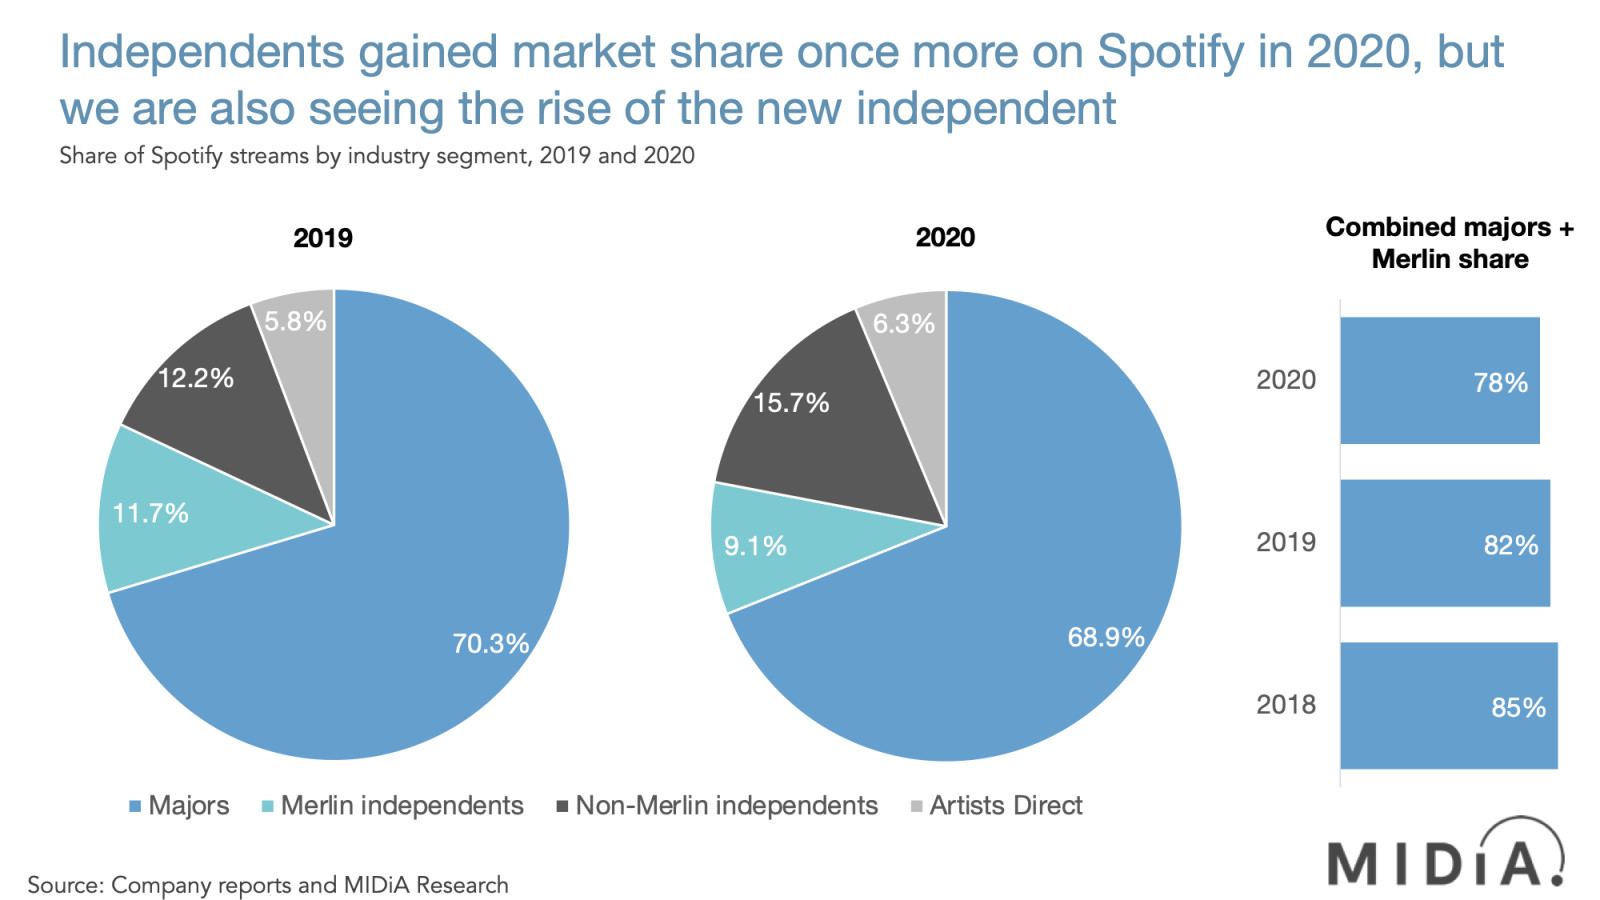 Artists taking control: Independent music is growing faster than major labels